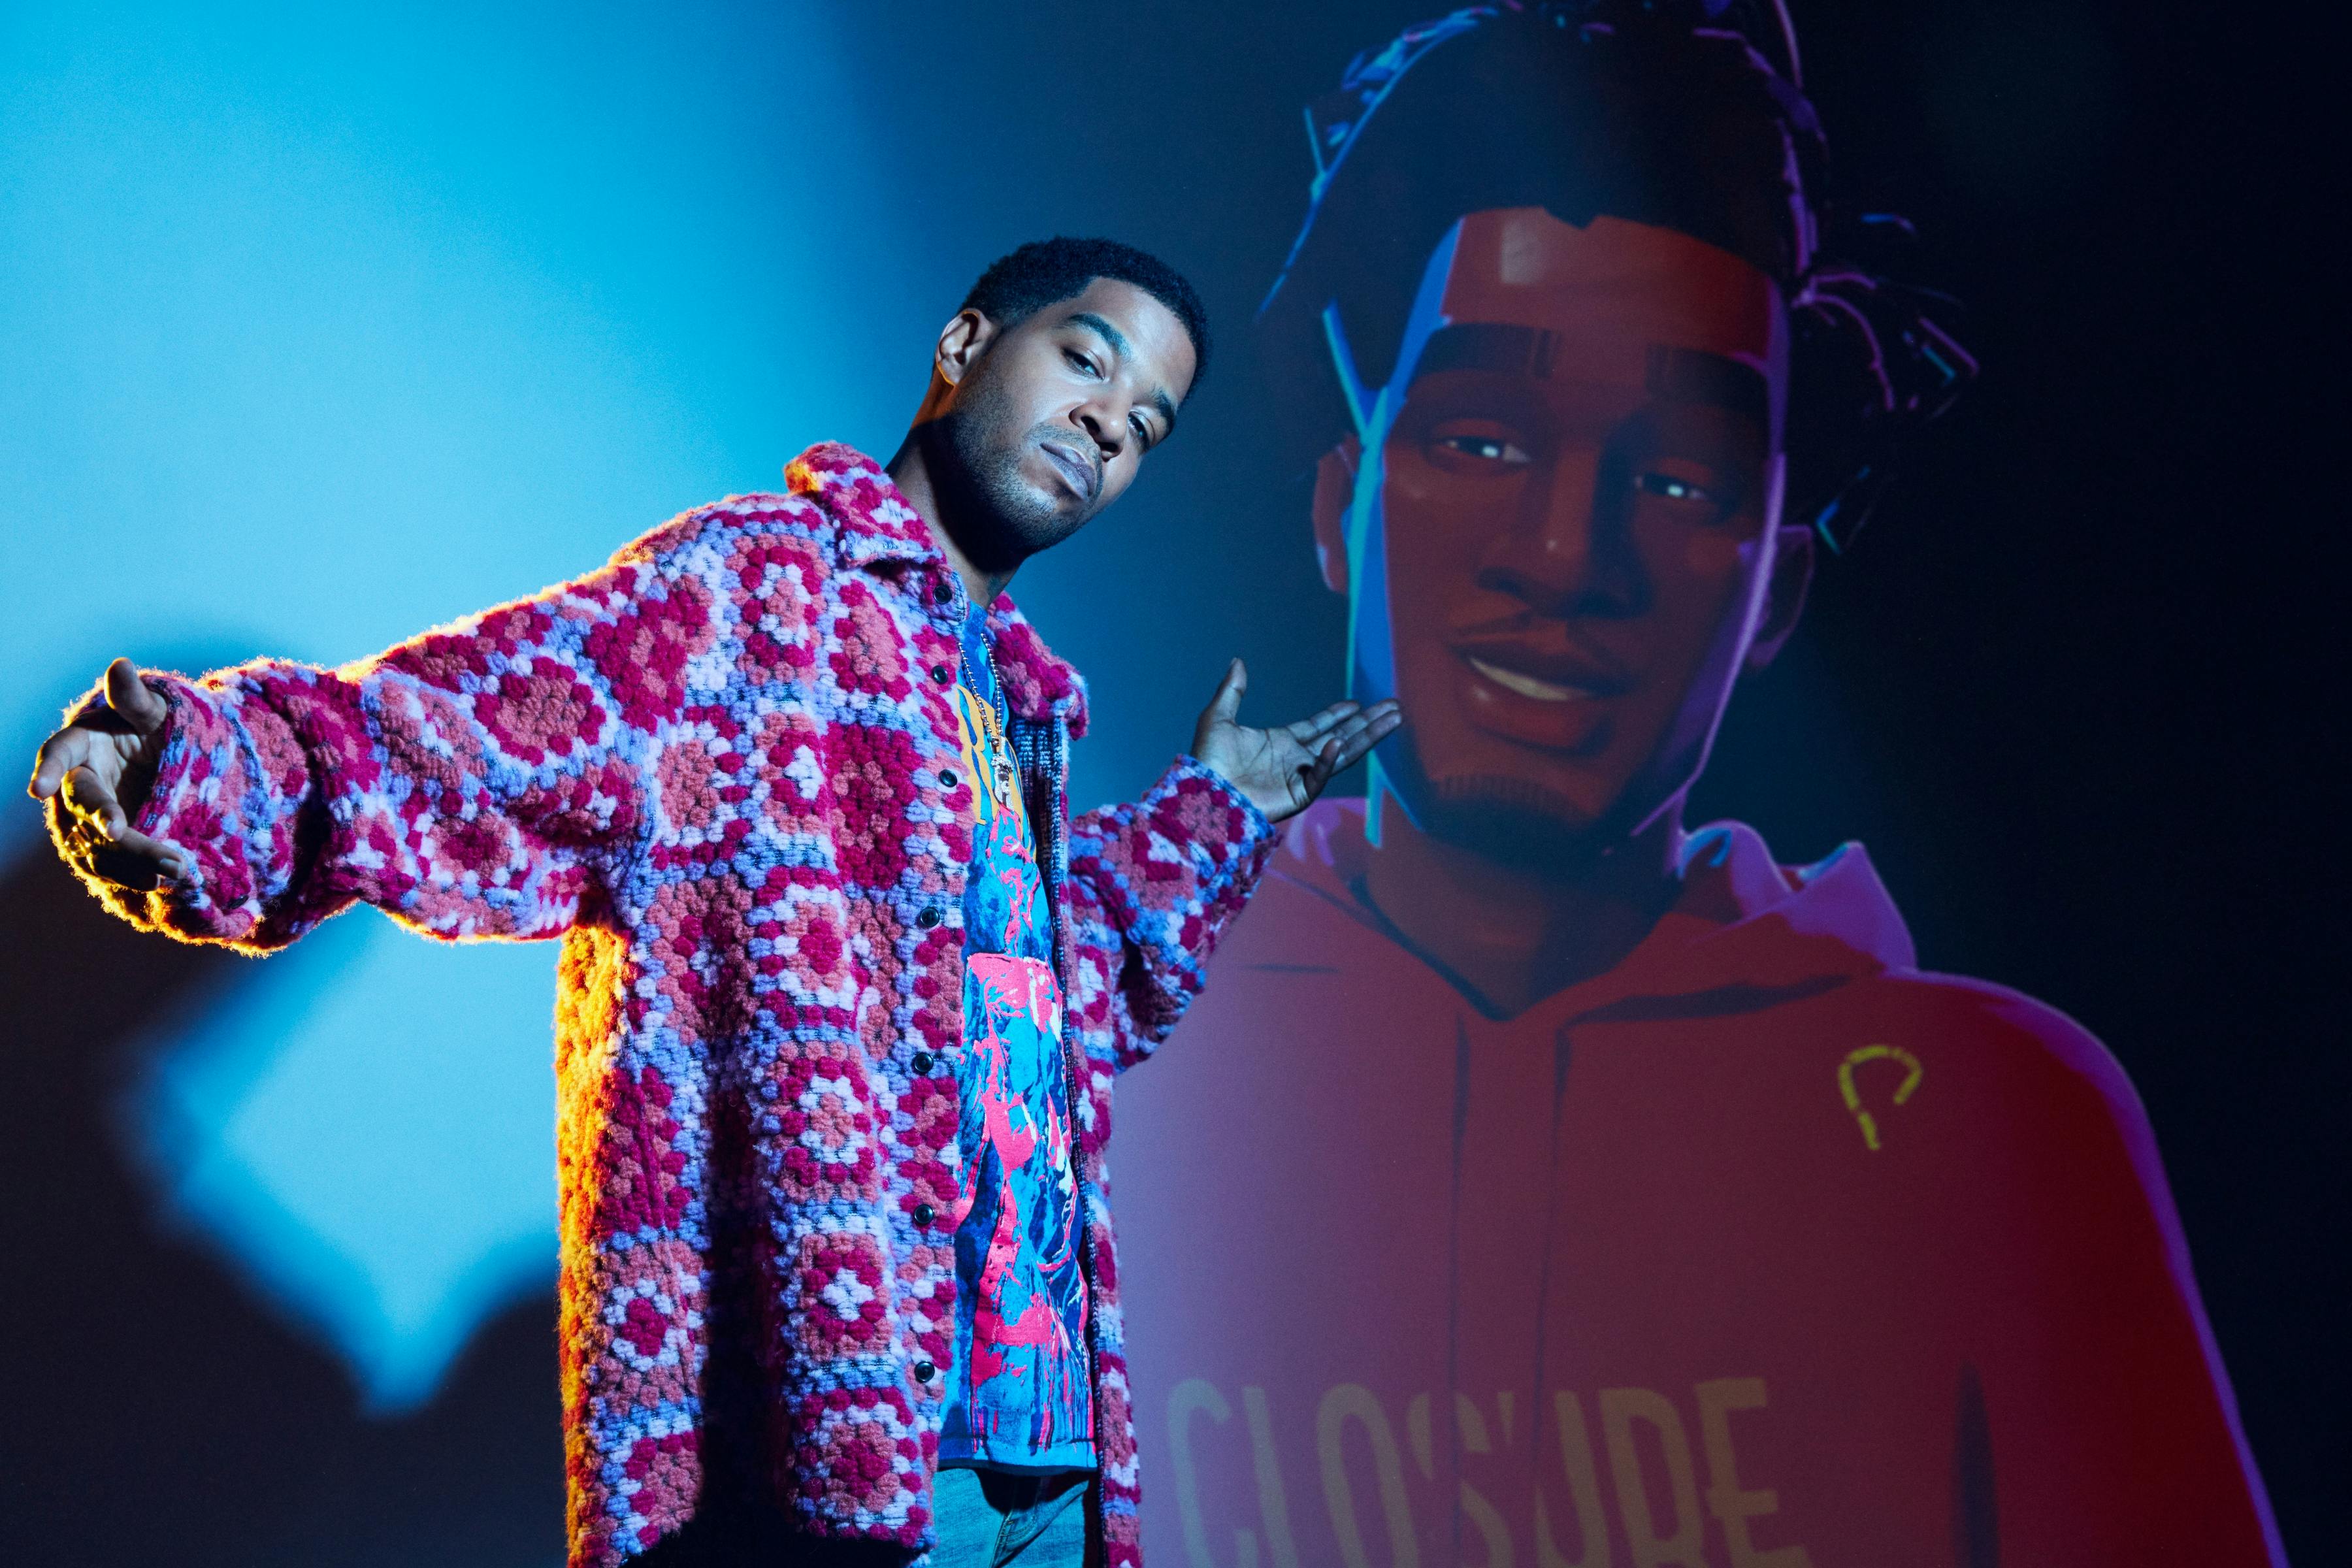 Jabari (Scott Mescudi) wears an incredible pink jacket and stands in front of a hologram of his character.